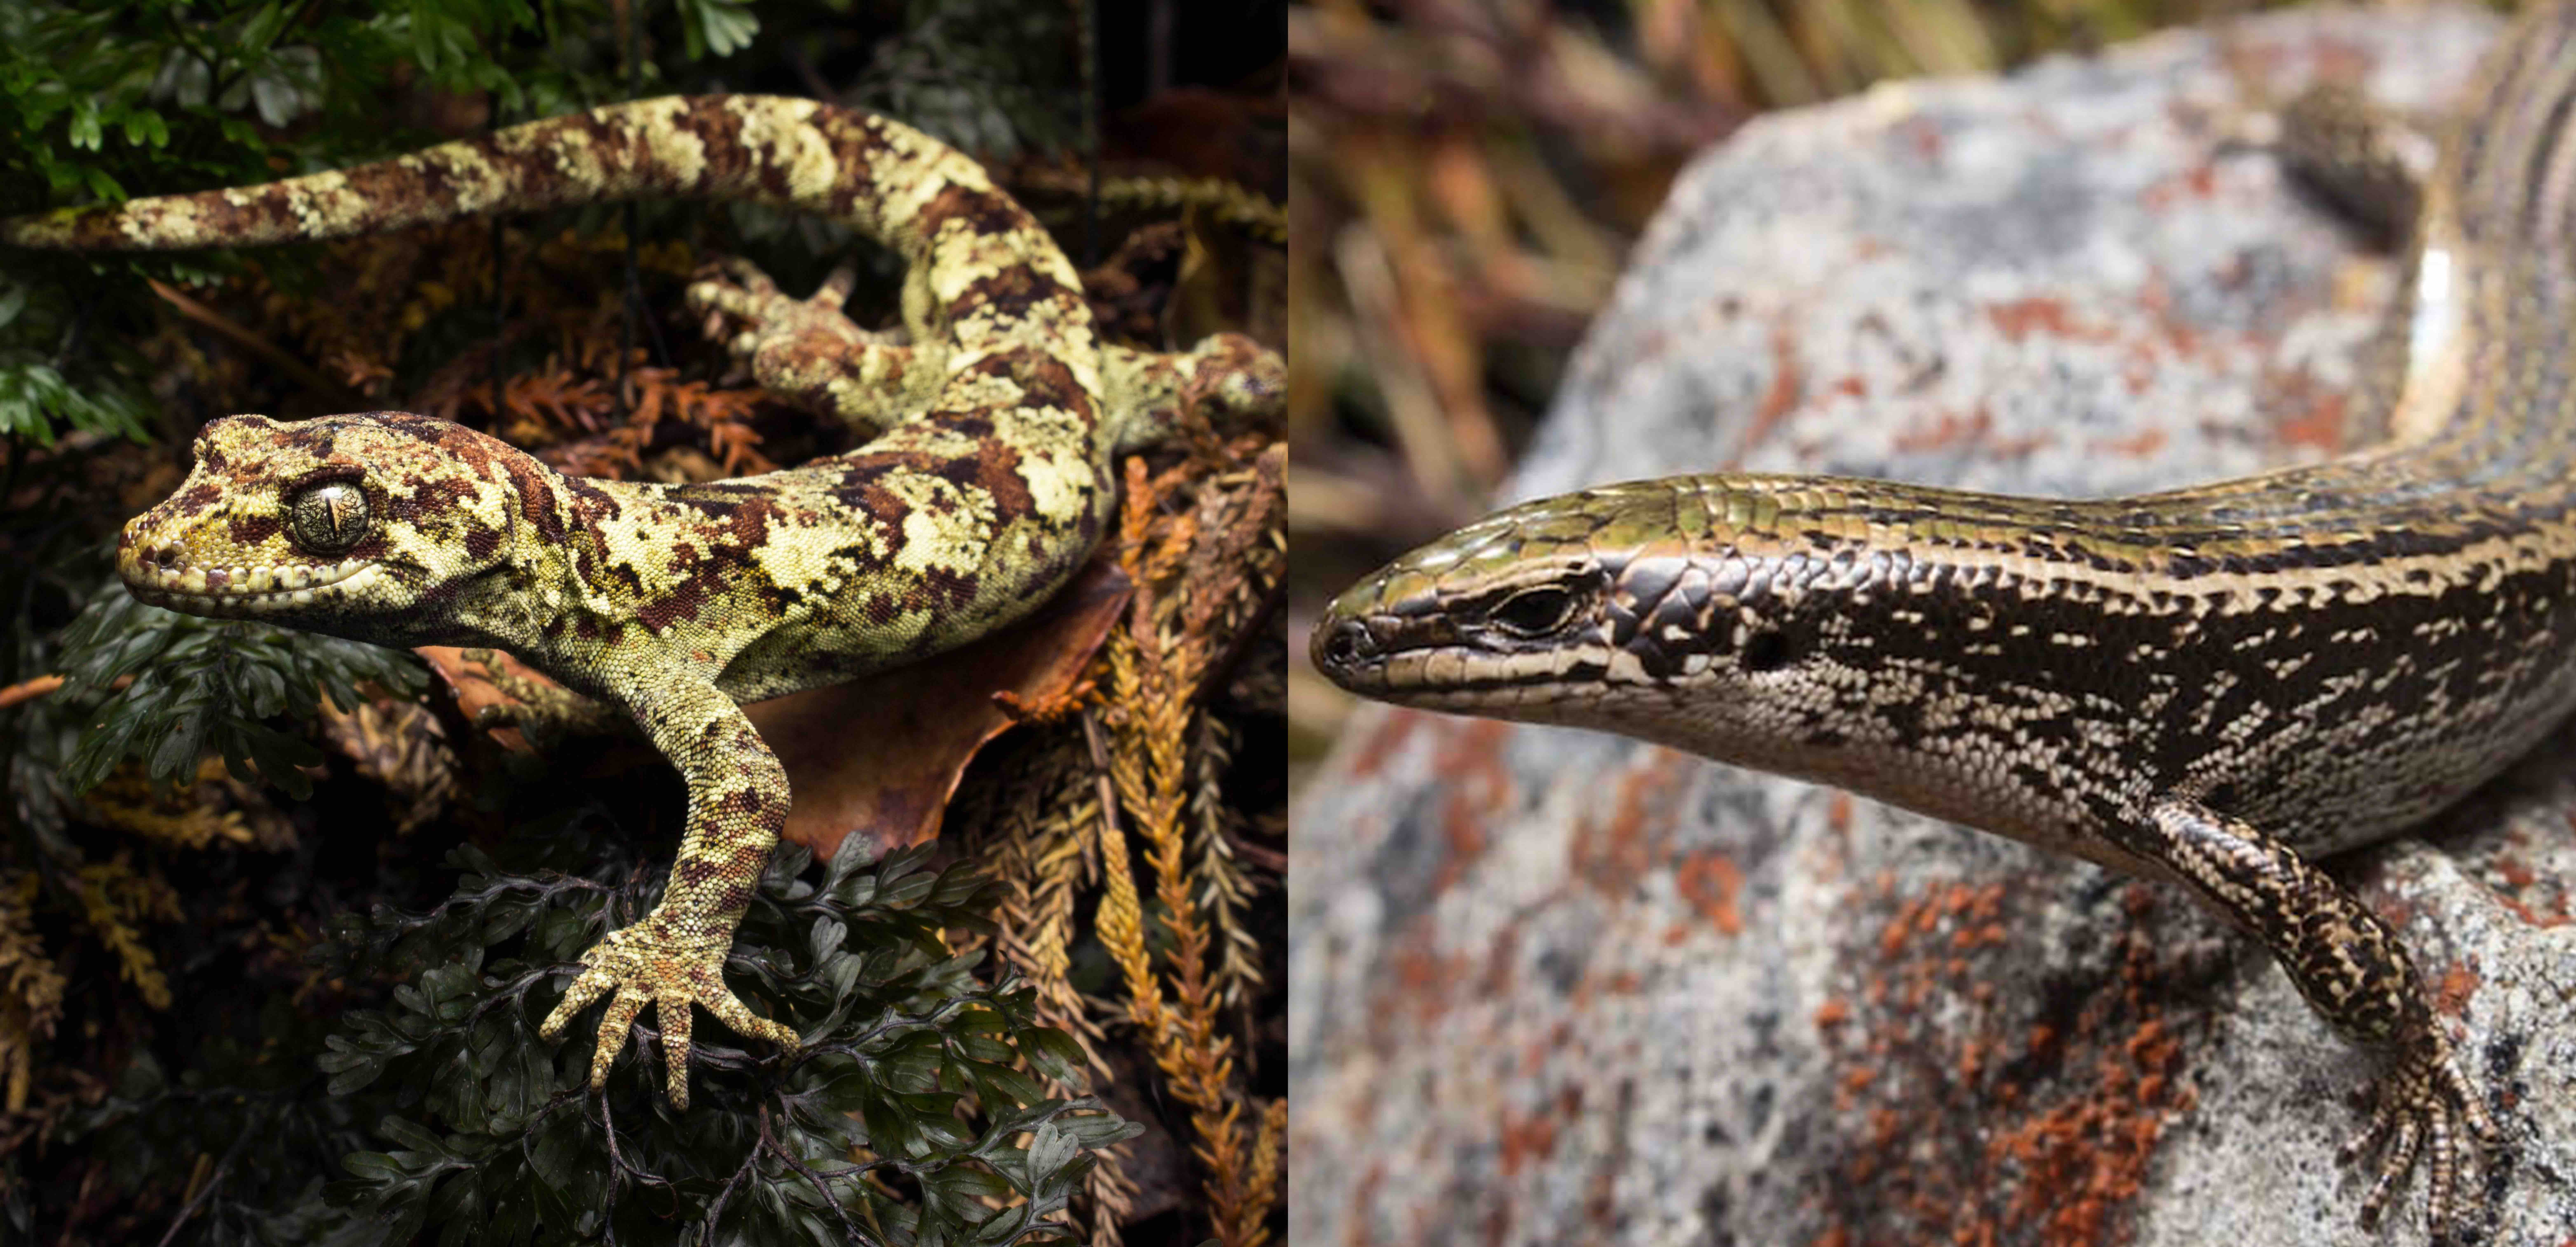 Comparing the differences in the two native lizard families: geckos and skinks.